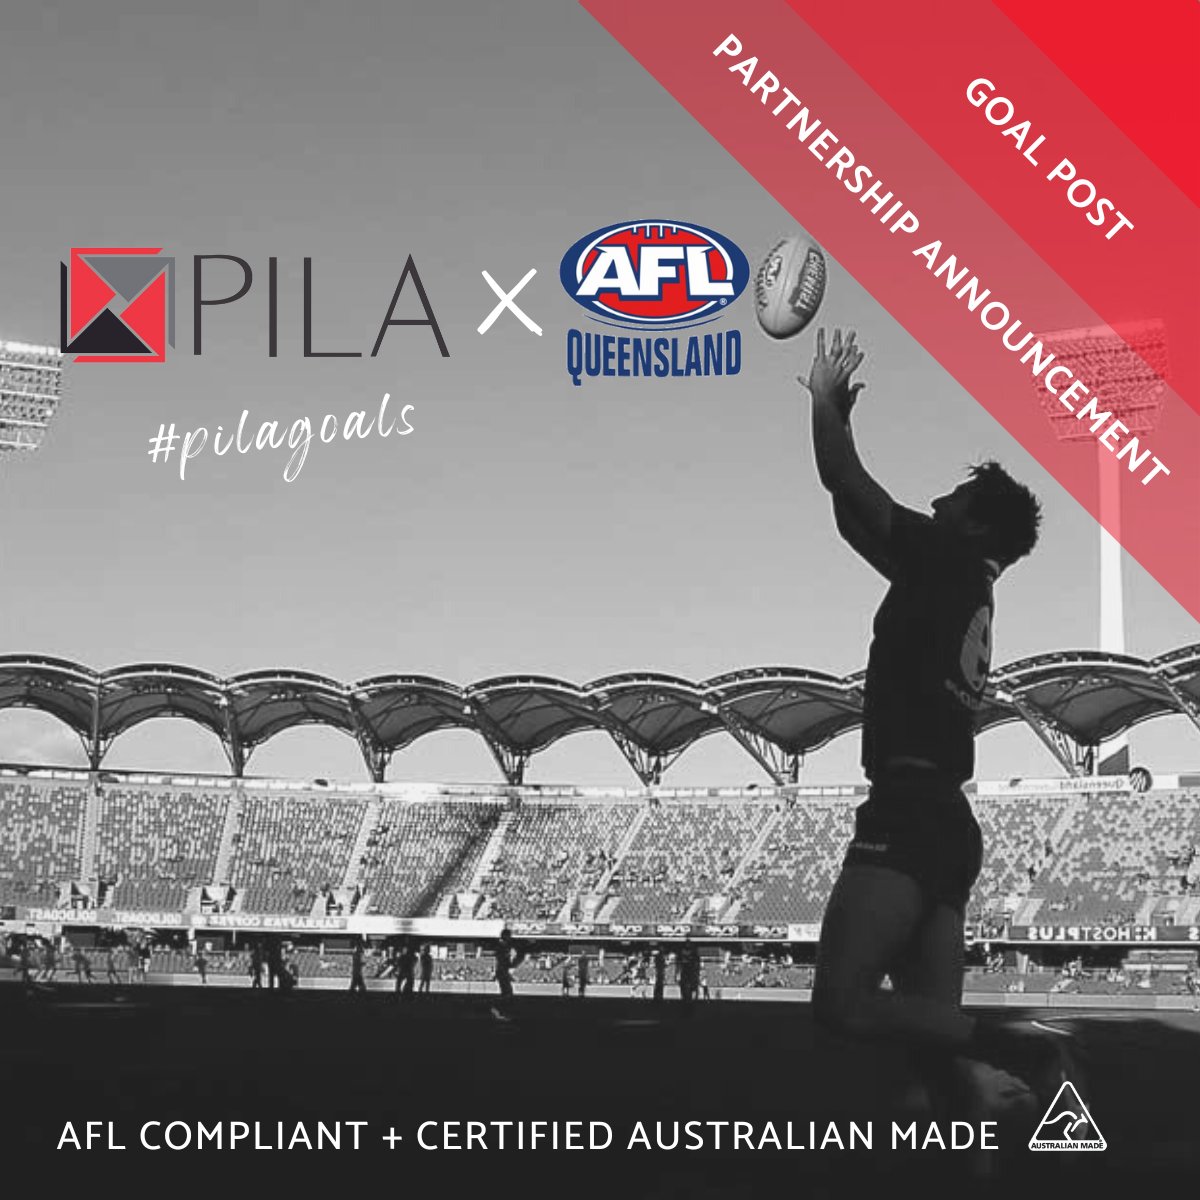 Thanks to Pila for allowing us to continue kicking goals...literally💪 Read more: aflq.com.au/aflq-extends-g…